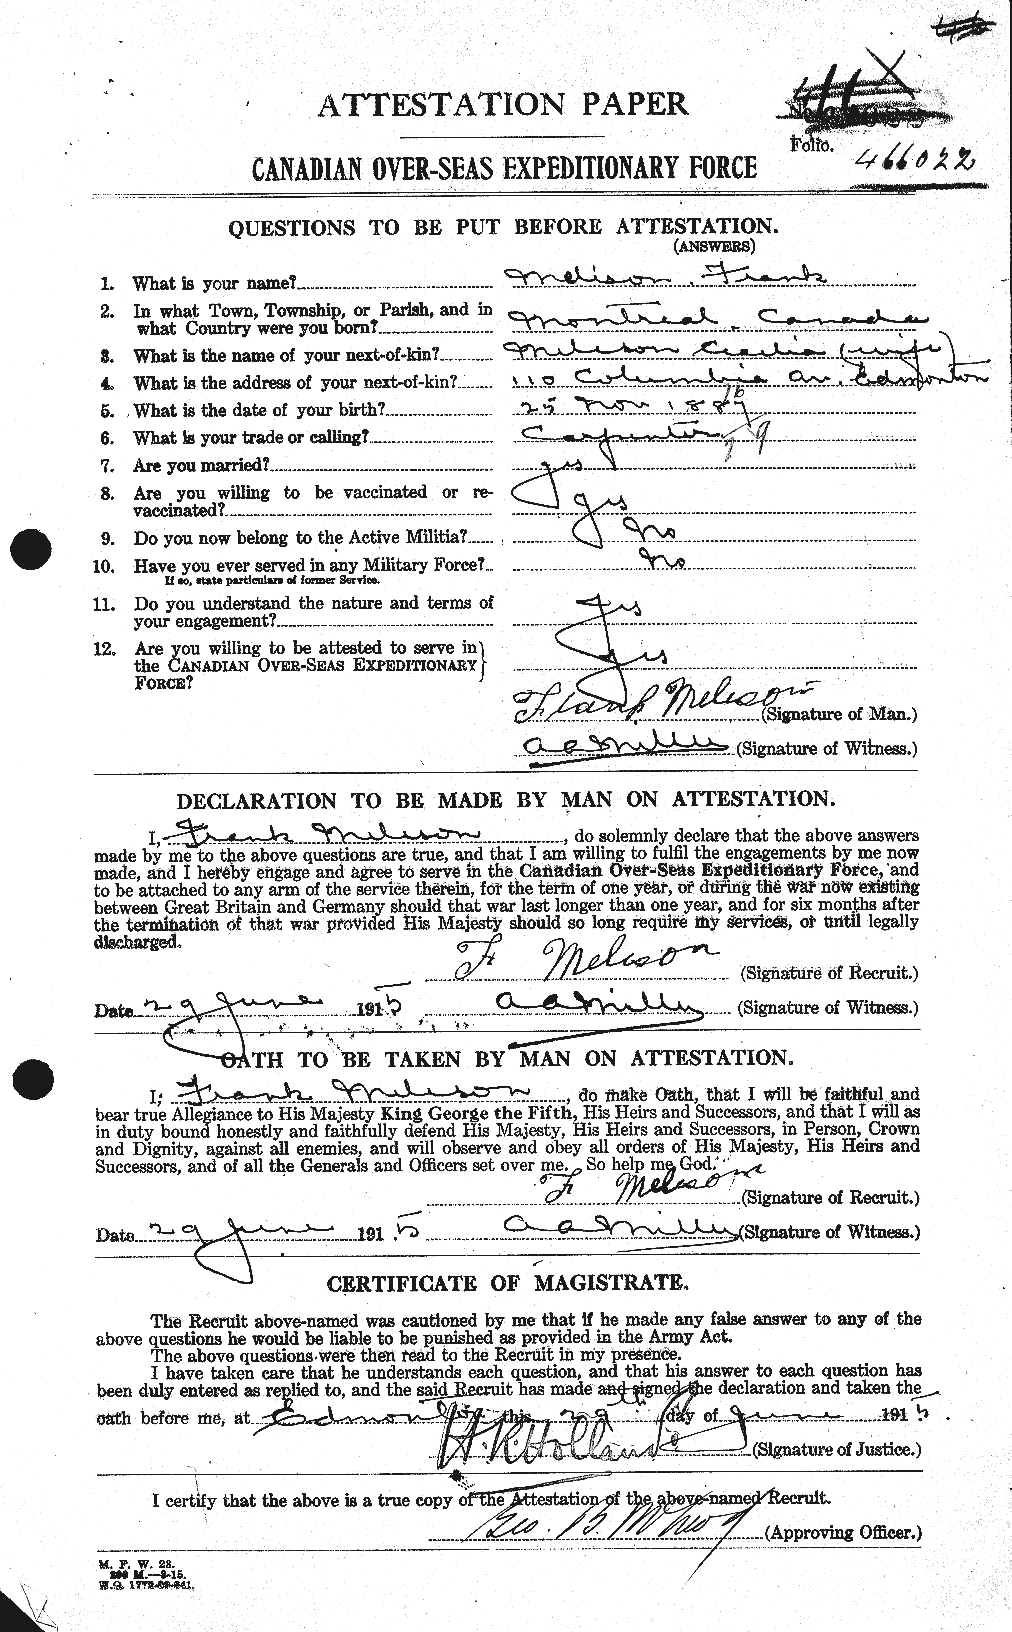 Personnel Records of the First World War - CEF 493682a